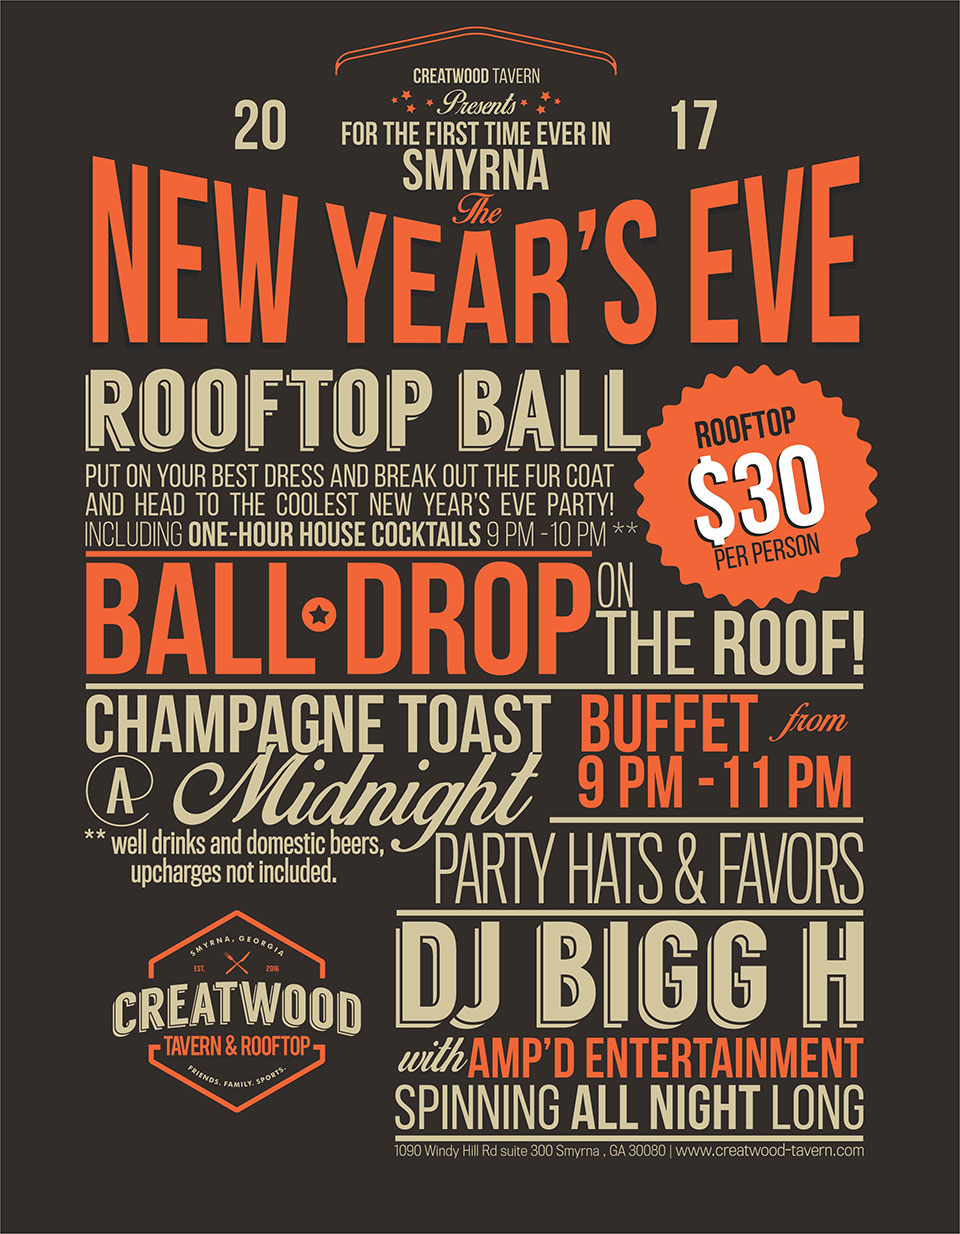 The New Year's Eve Rooftop Ball! @ Creatwood Tavern Rooftop Bar